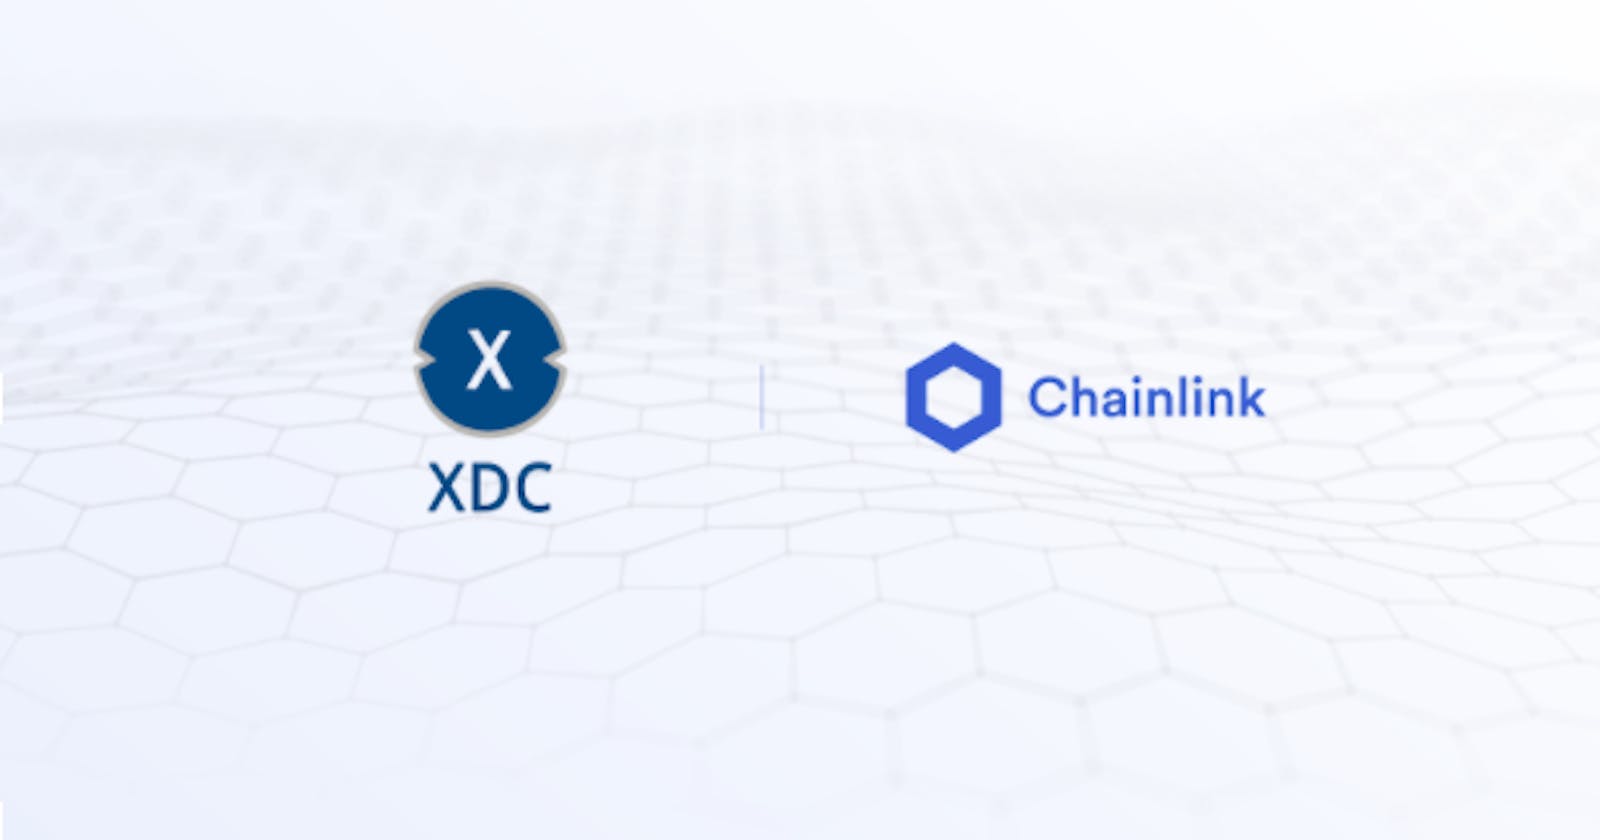 XinFin [XDC] Network Will Integrate Chainlink Oracles to Power New Trade Finance Use Cases